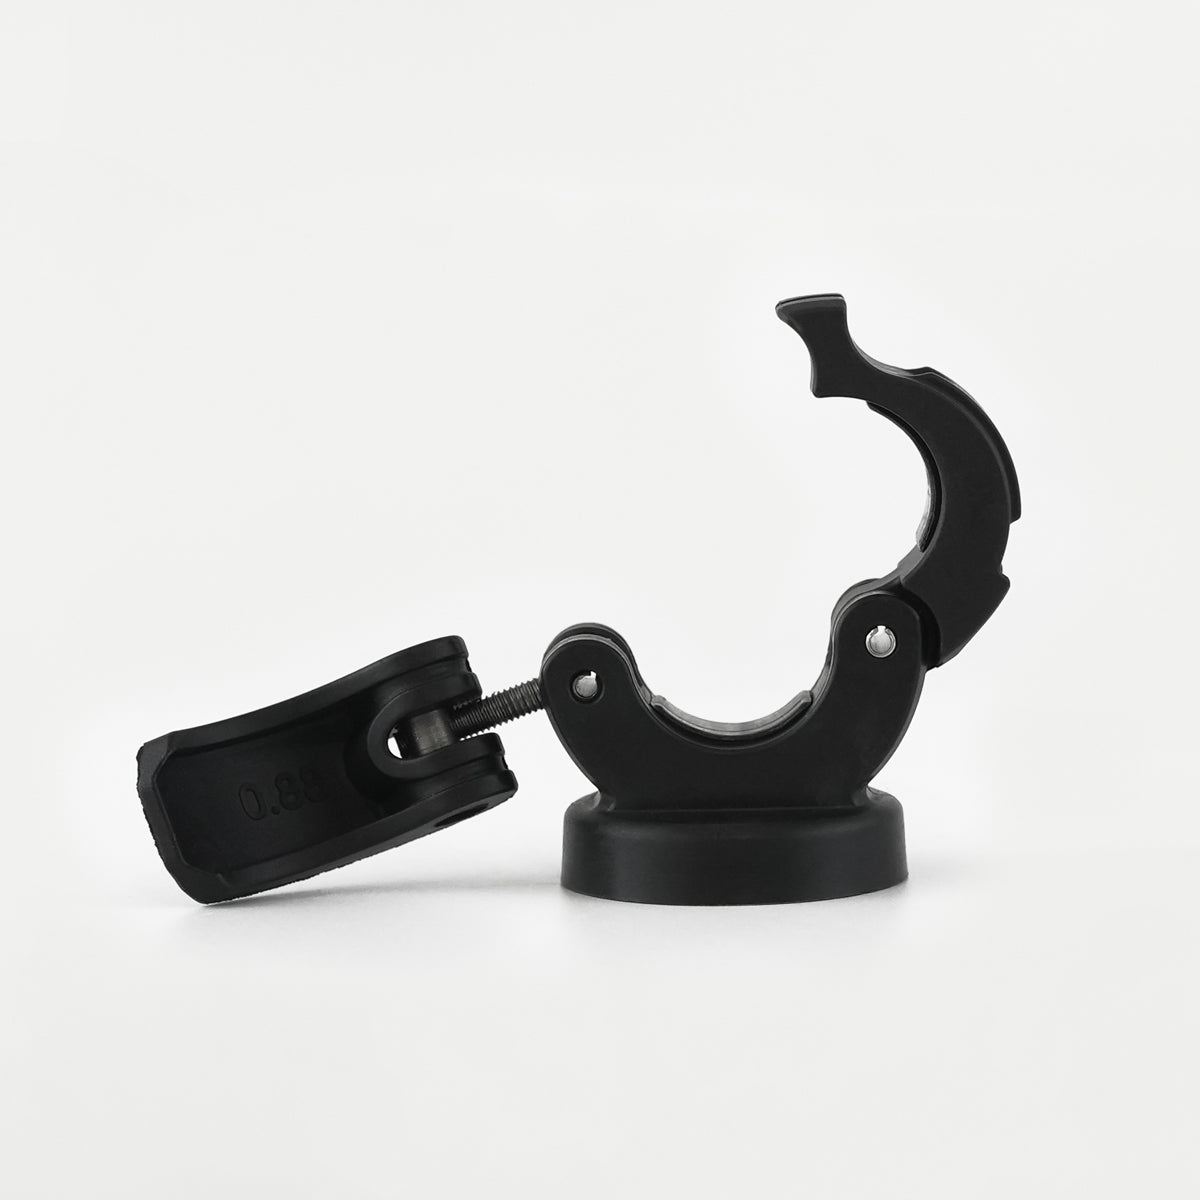 0.875" nomad+ Universal Bar Magnetic Phone Mount with quick-release snap over clamp open